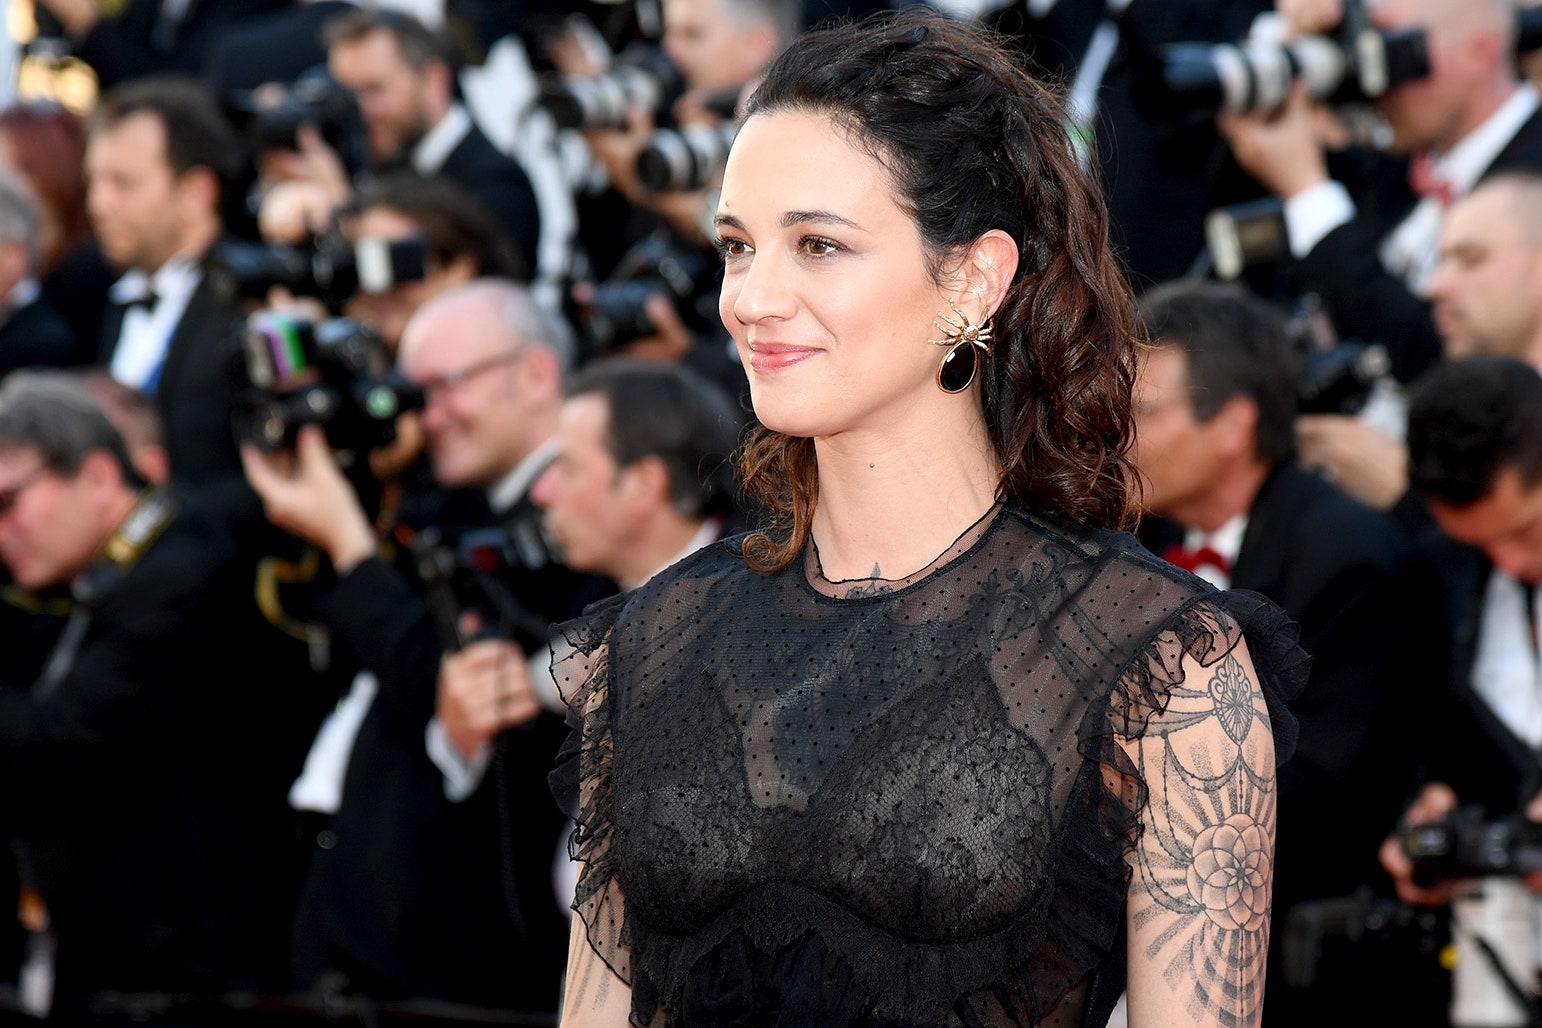 After 24 years ... Asia Argento , a famous Italian actress, accuses the director of "Fast and Furious" of raping her.